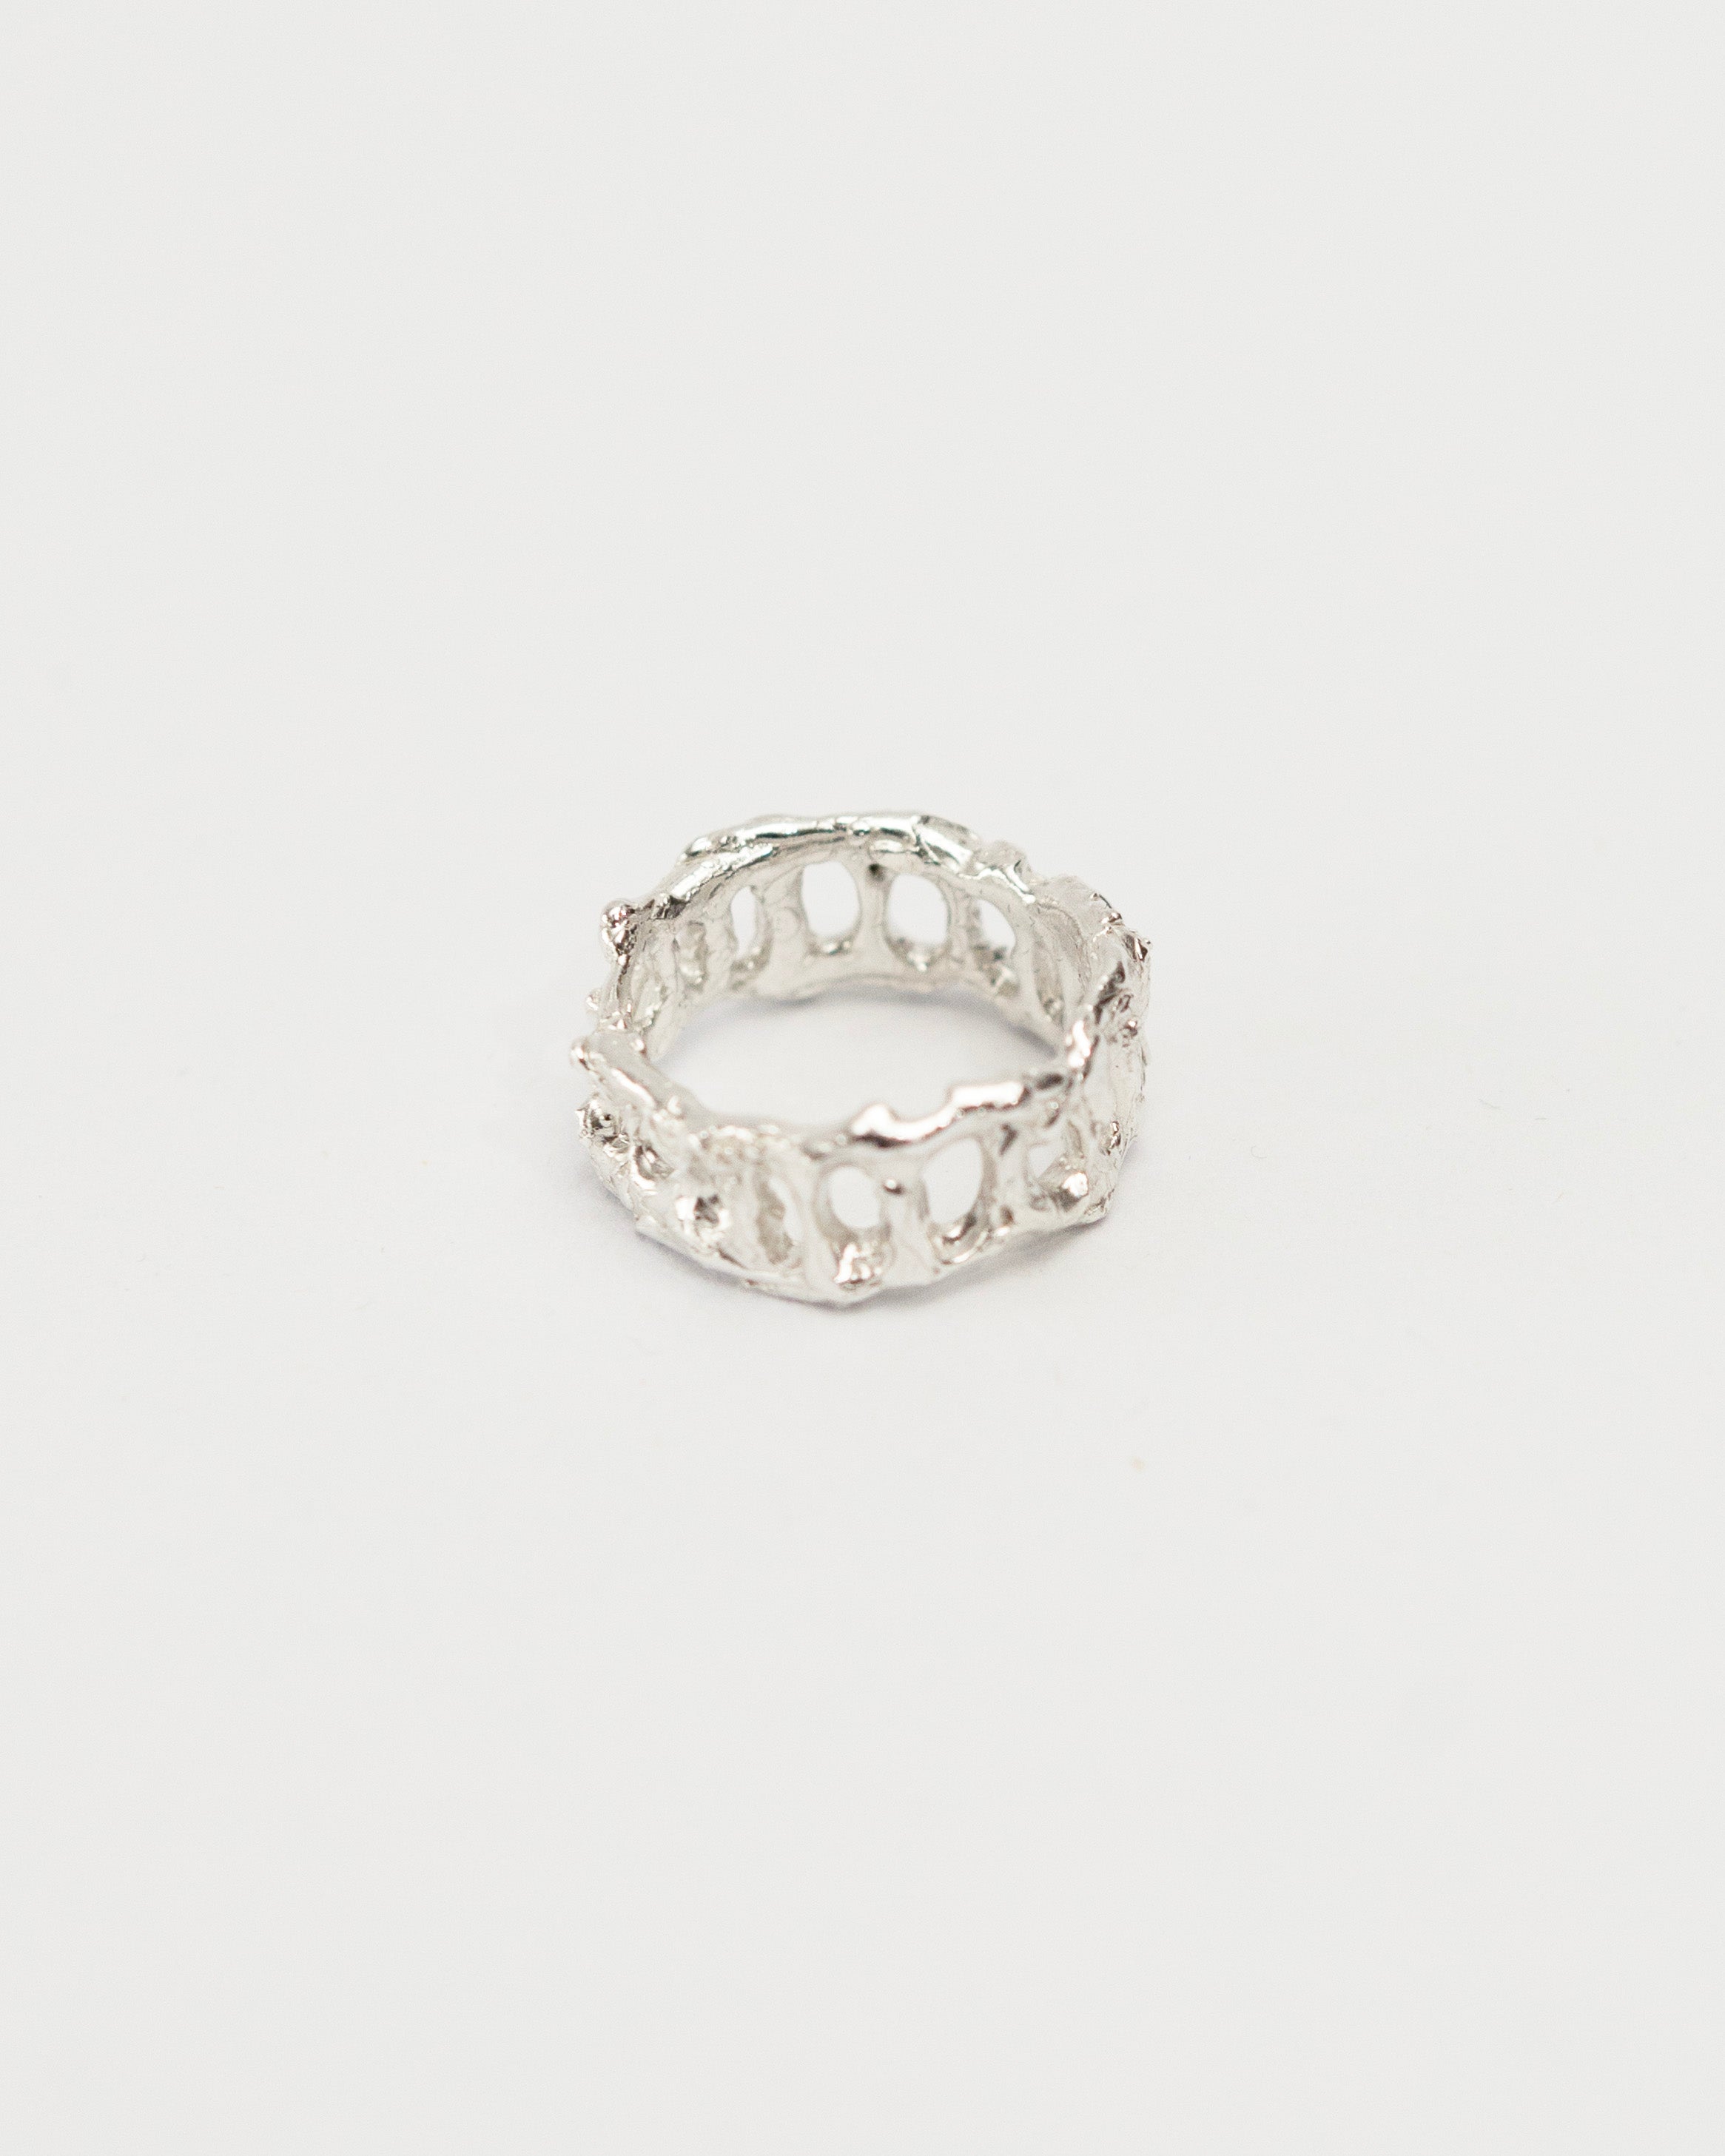 S. BHHABOO: MELTING GATE RING